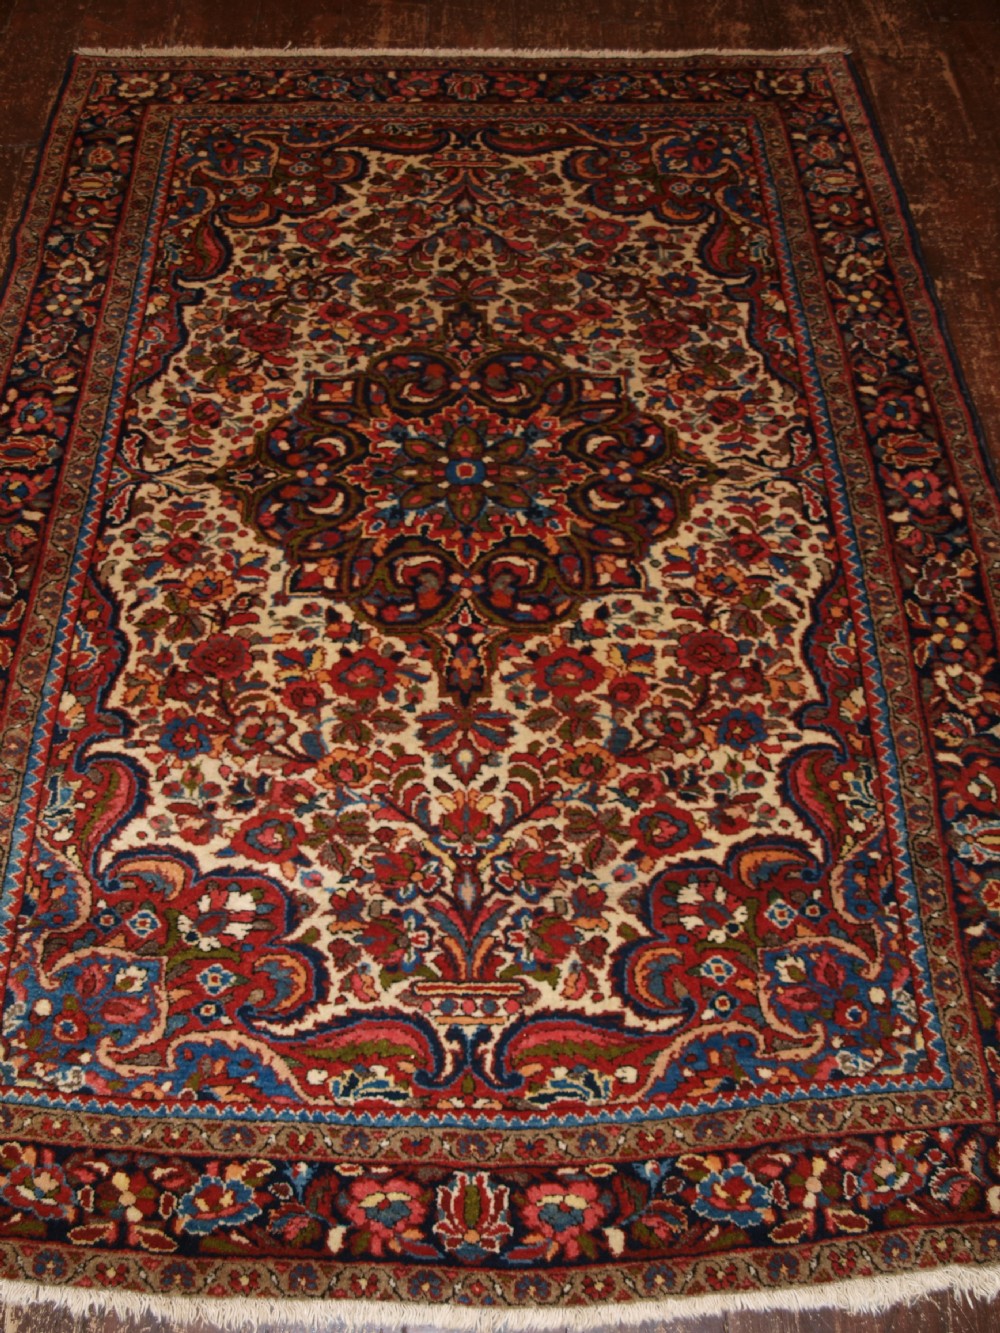 old north persian lilihan rug classic floral design white ground 60 years old